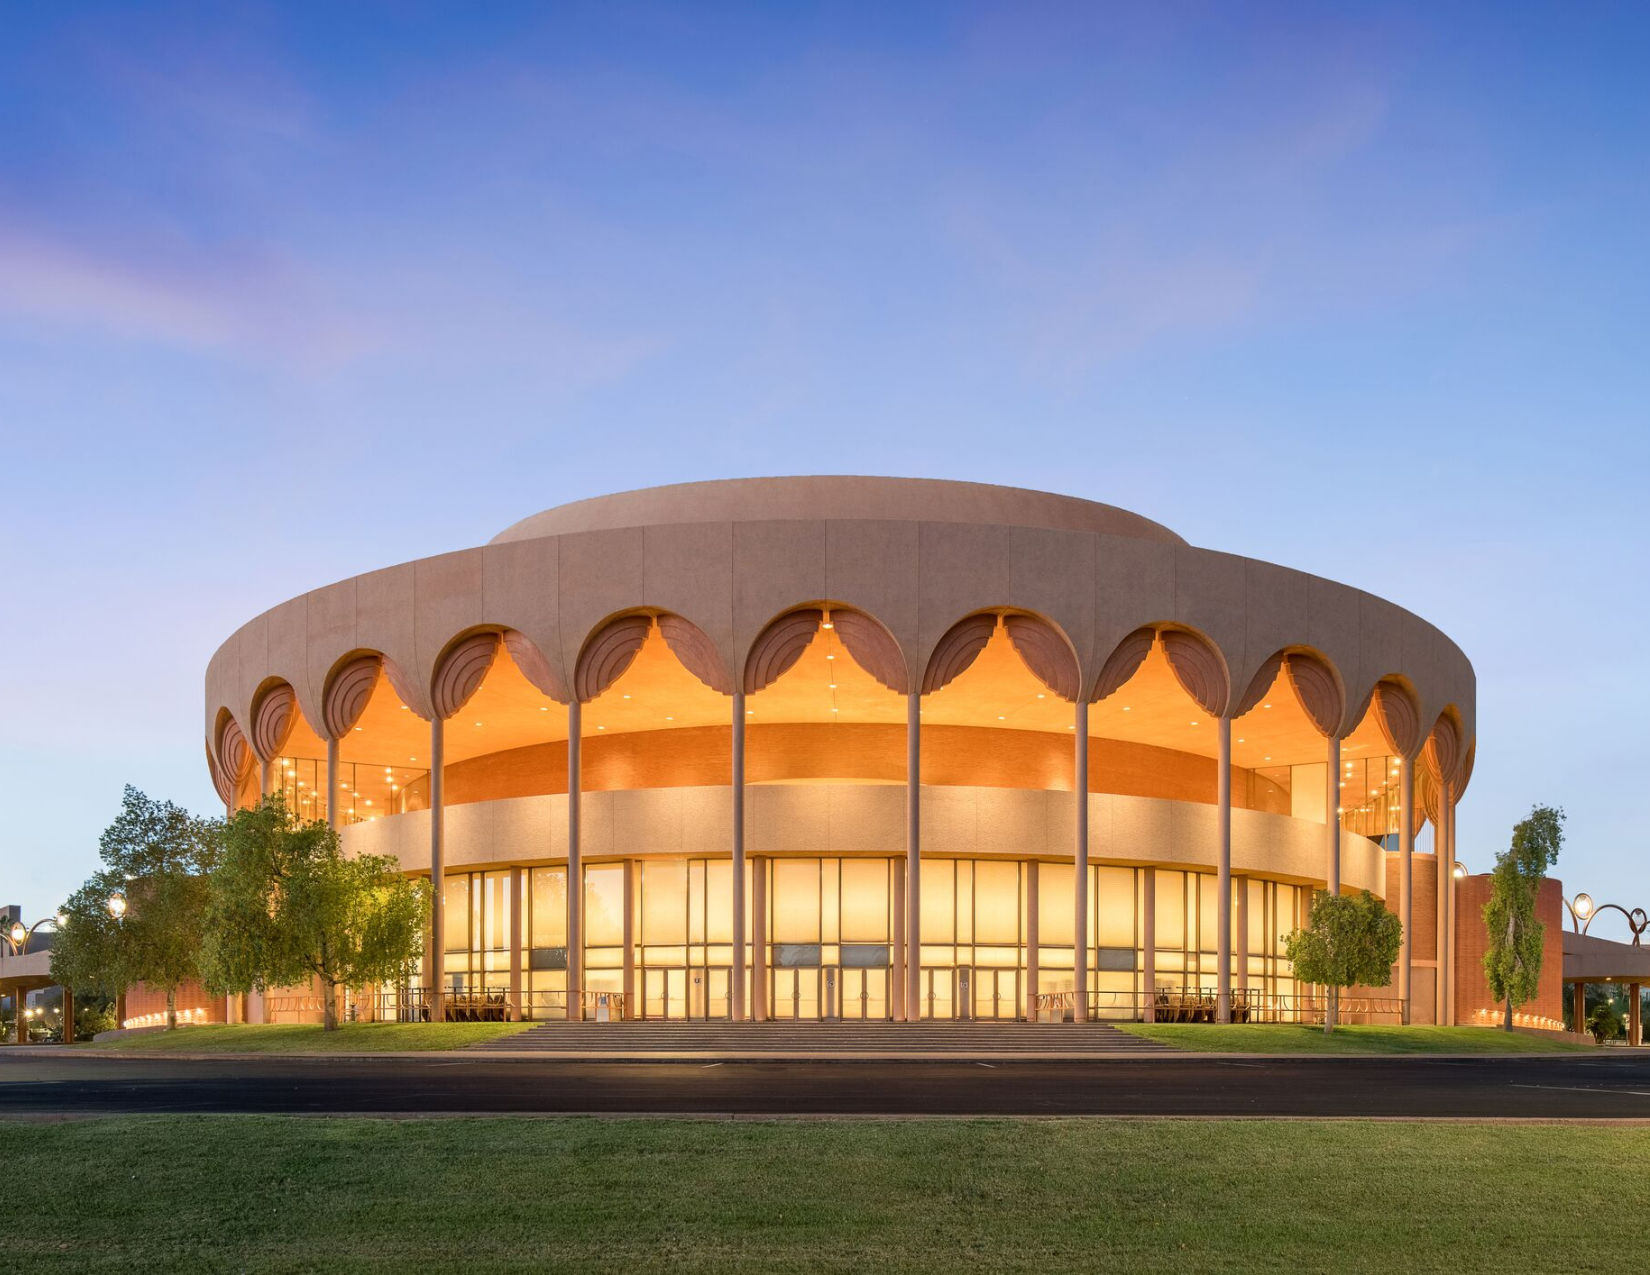 The outside Gammage Auditorium lit up during sunset as a Broadway show is performed inside the theater.